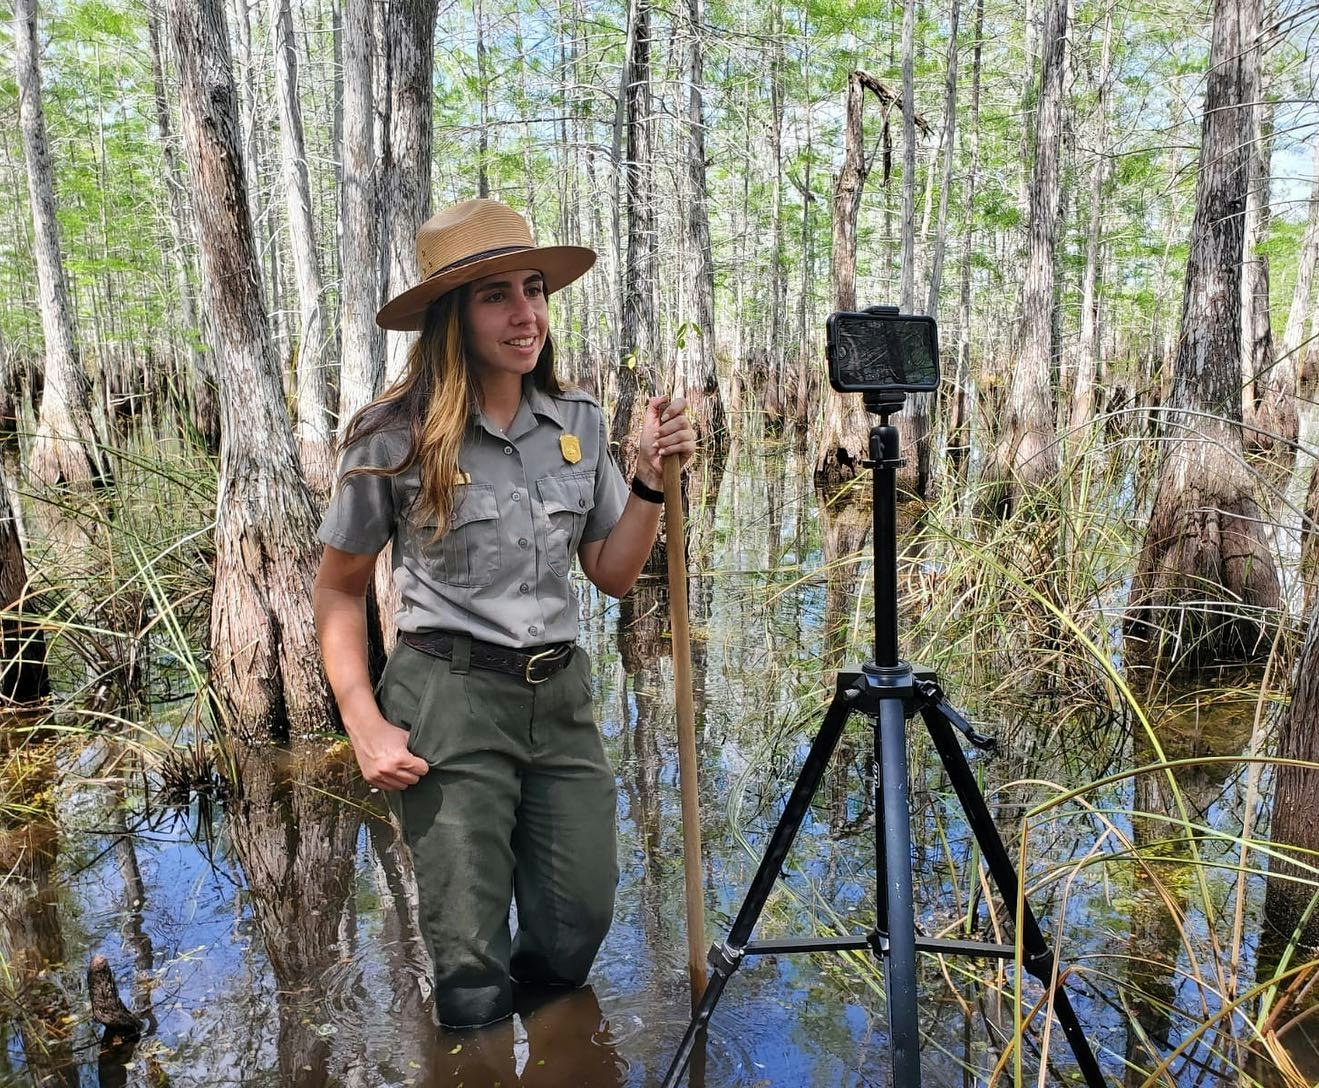 Ranger, in uniform, waves and smiles at a camera on a tripod. She stands in a cypress swamp